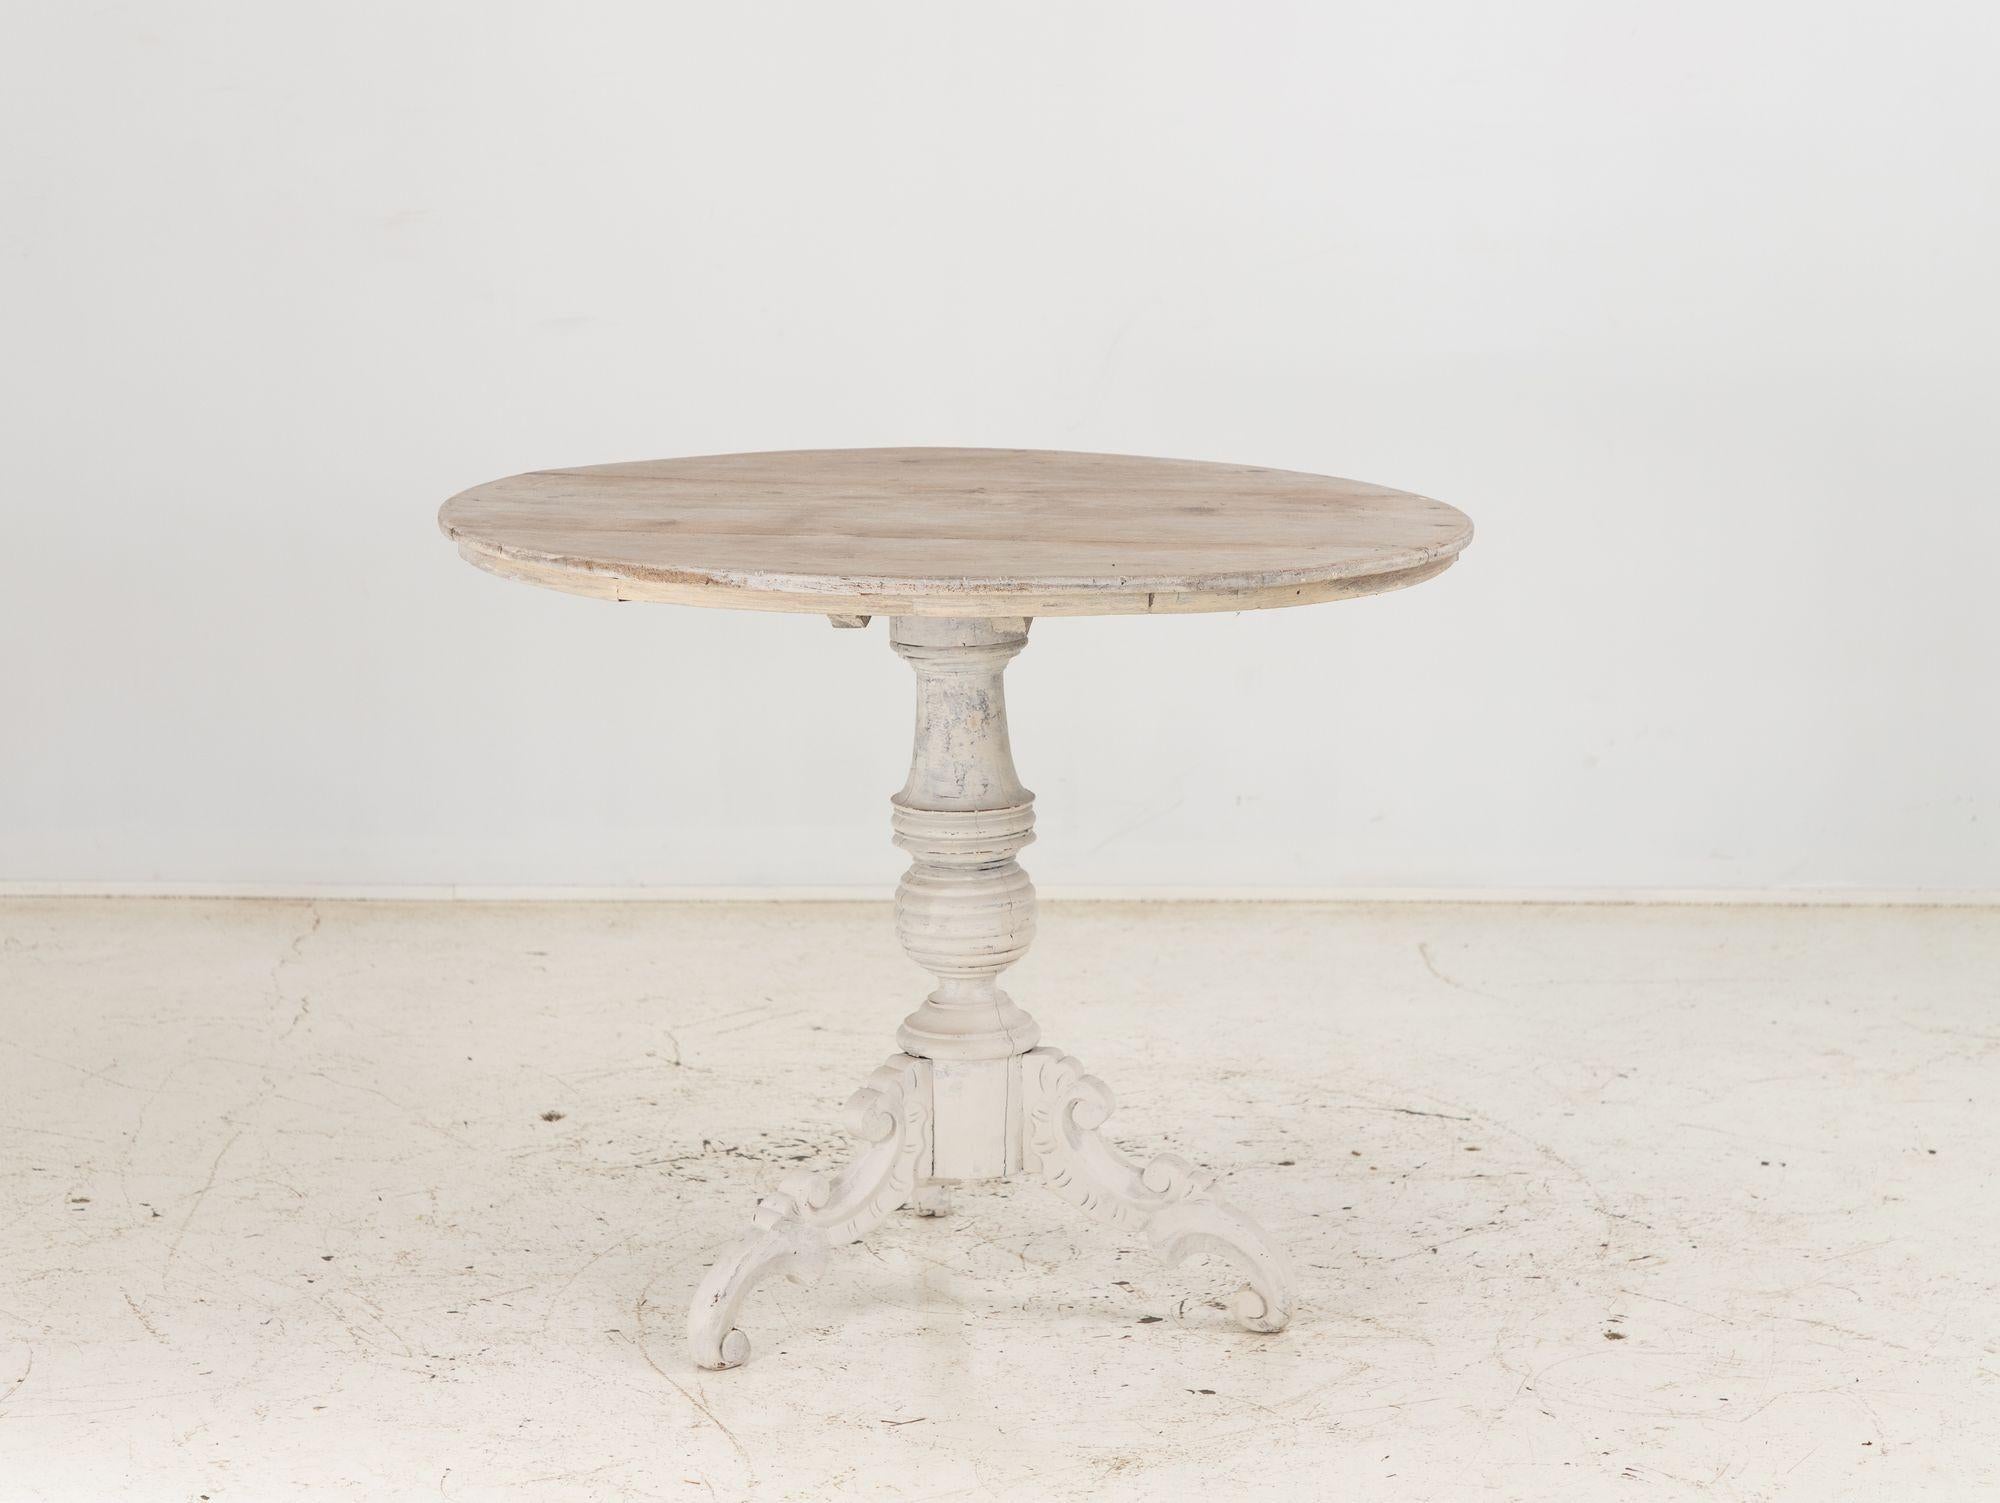 The English late 19th-century pedestal table, elegantly painted in gray, exudes timeless charm and sophistication. Crafted with meticulous attention to detail, this table features a central pedestal base that provides visual appeal. The gray paint